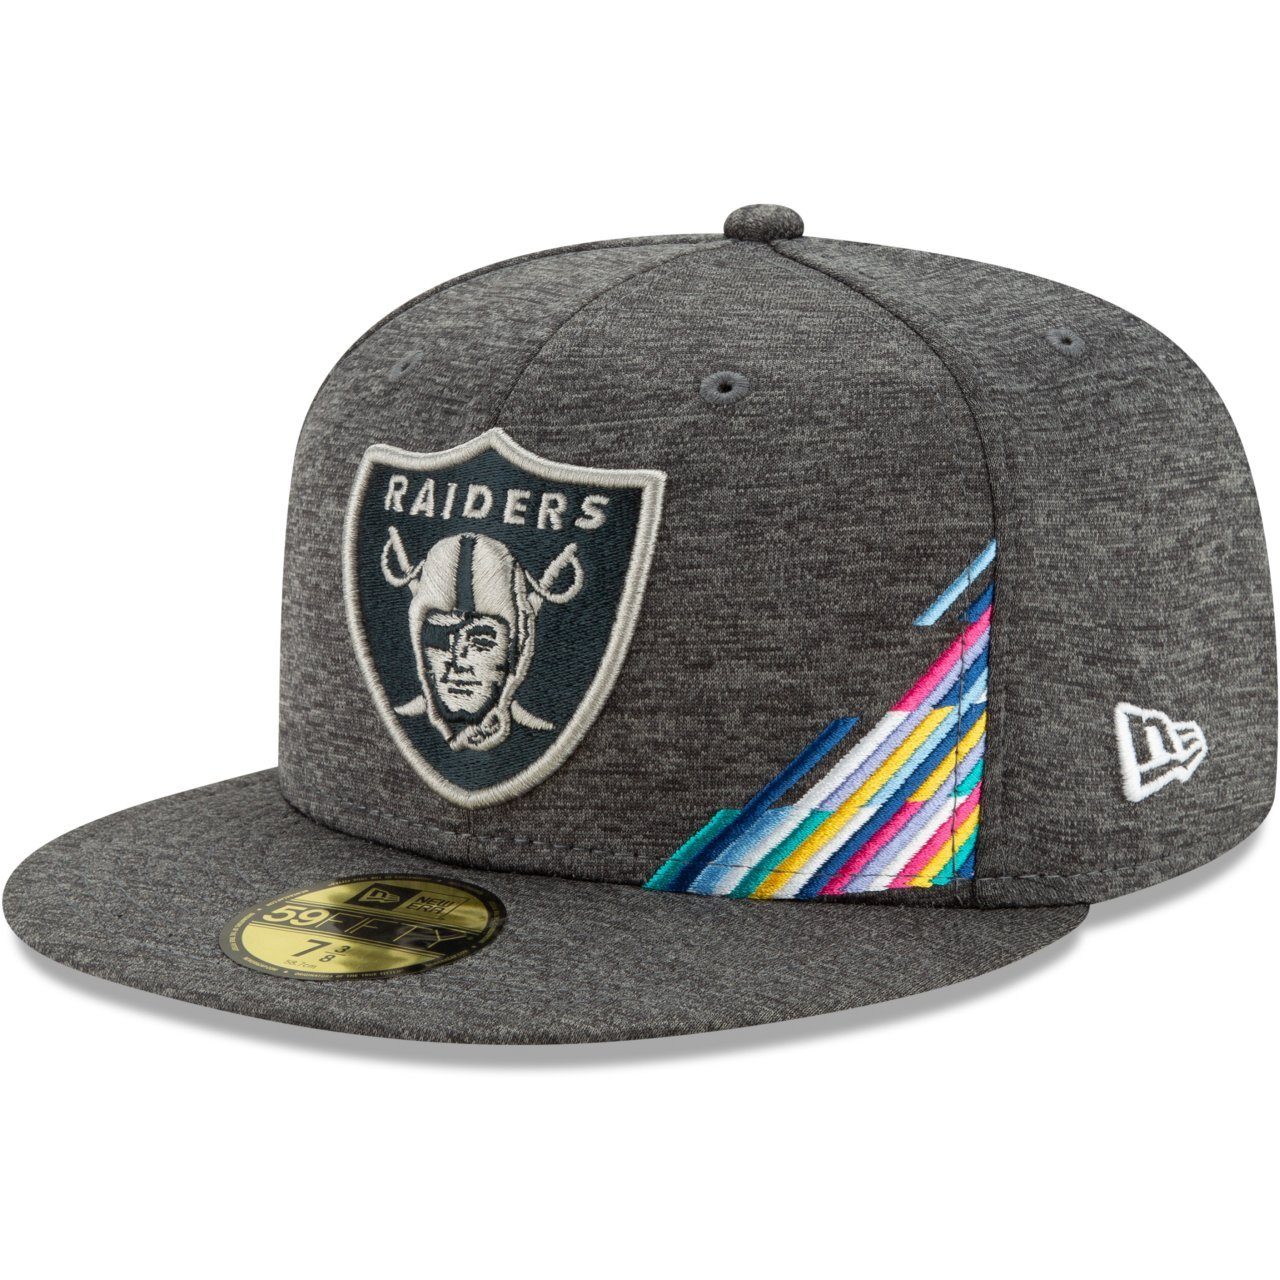 59Fifty NFL Fitted Raiders Era Cap New Oakland Teams CATCH CRUCIAL